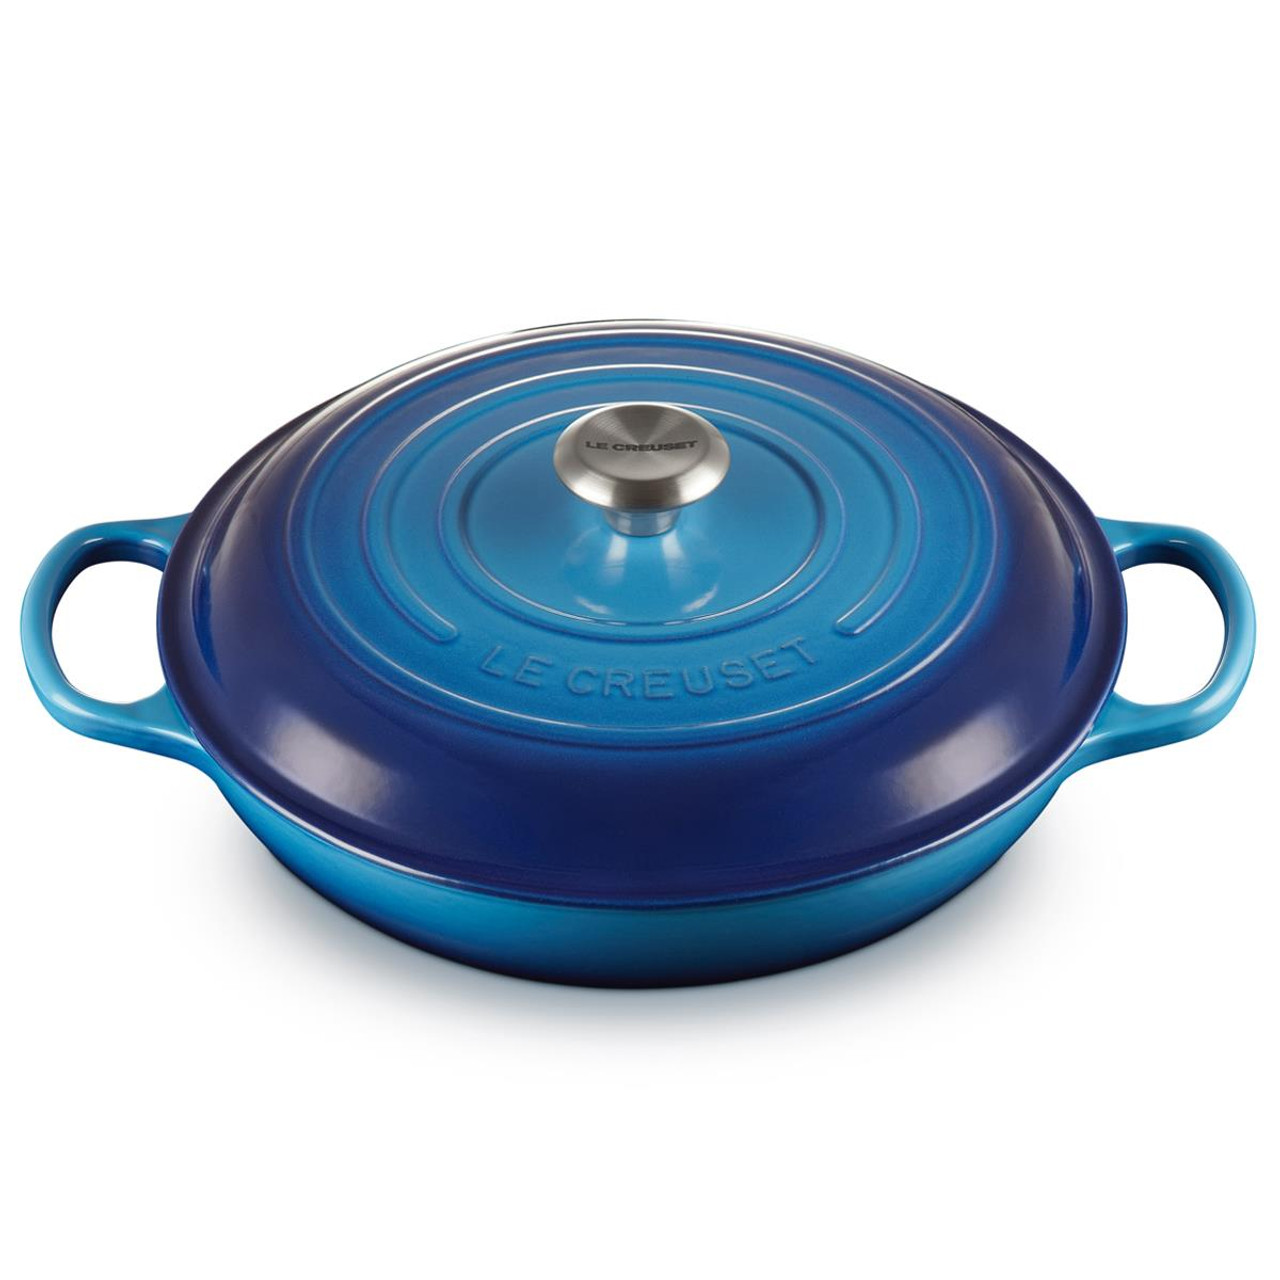 What are the features of the Le Creuset shallow casserole?